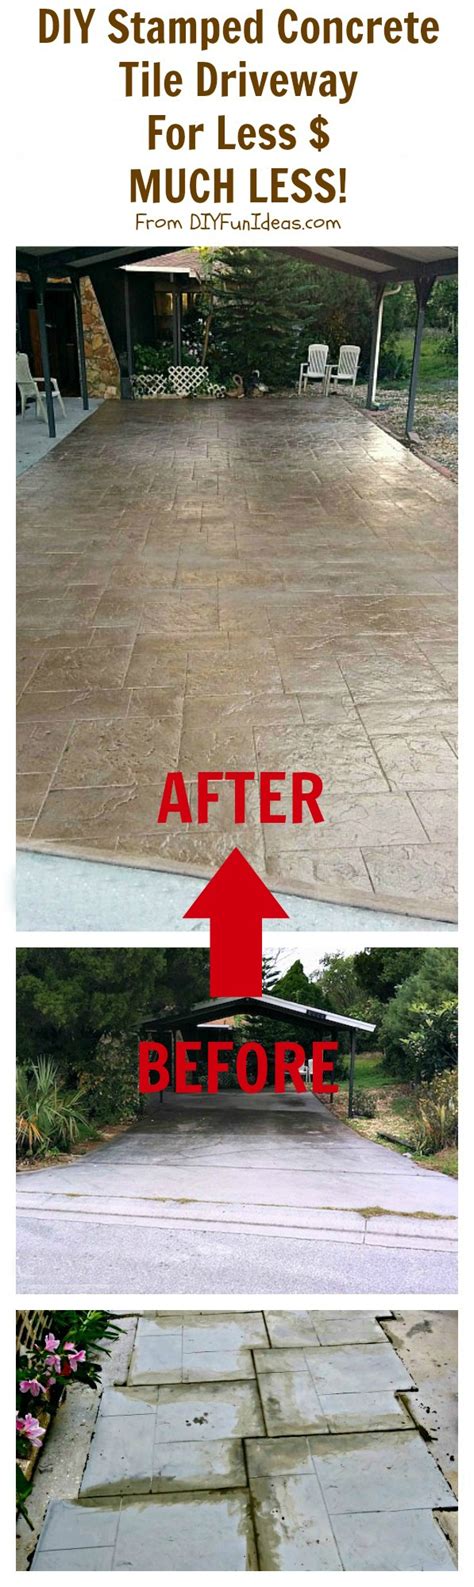 It does not have to take any special tools to do minor projects. GORGEOUS DIY STAMPED CONCRETE TILE DRIVEWAY FOR LESS $...MUCH LESS!!! - Do-It-Yourself Fun Ideas